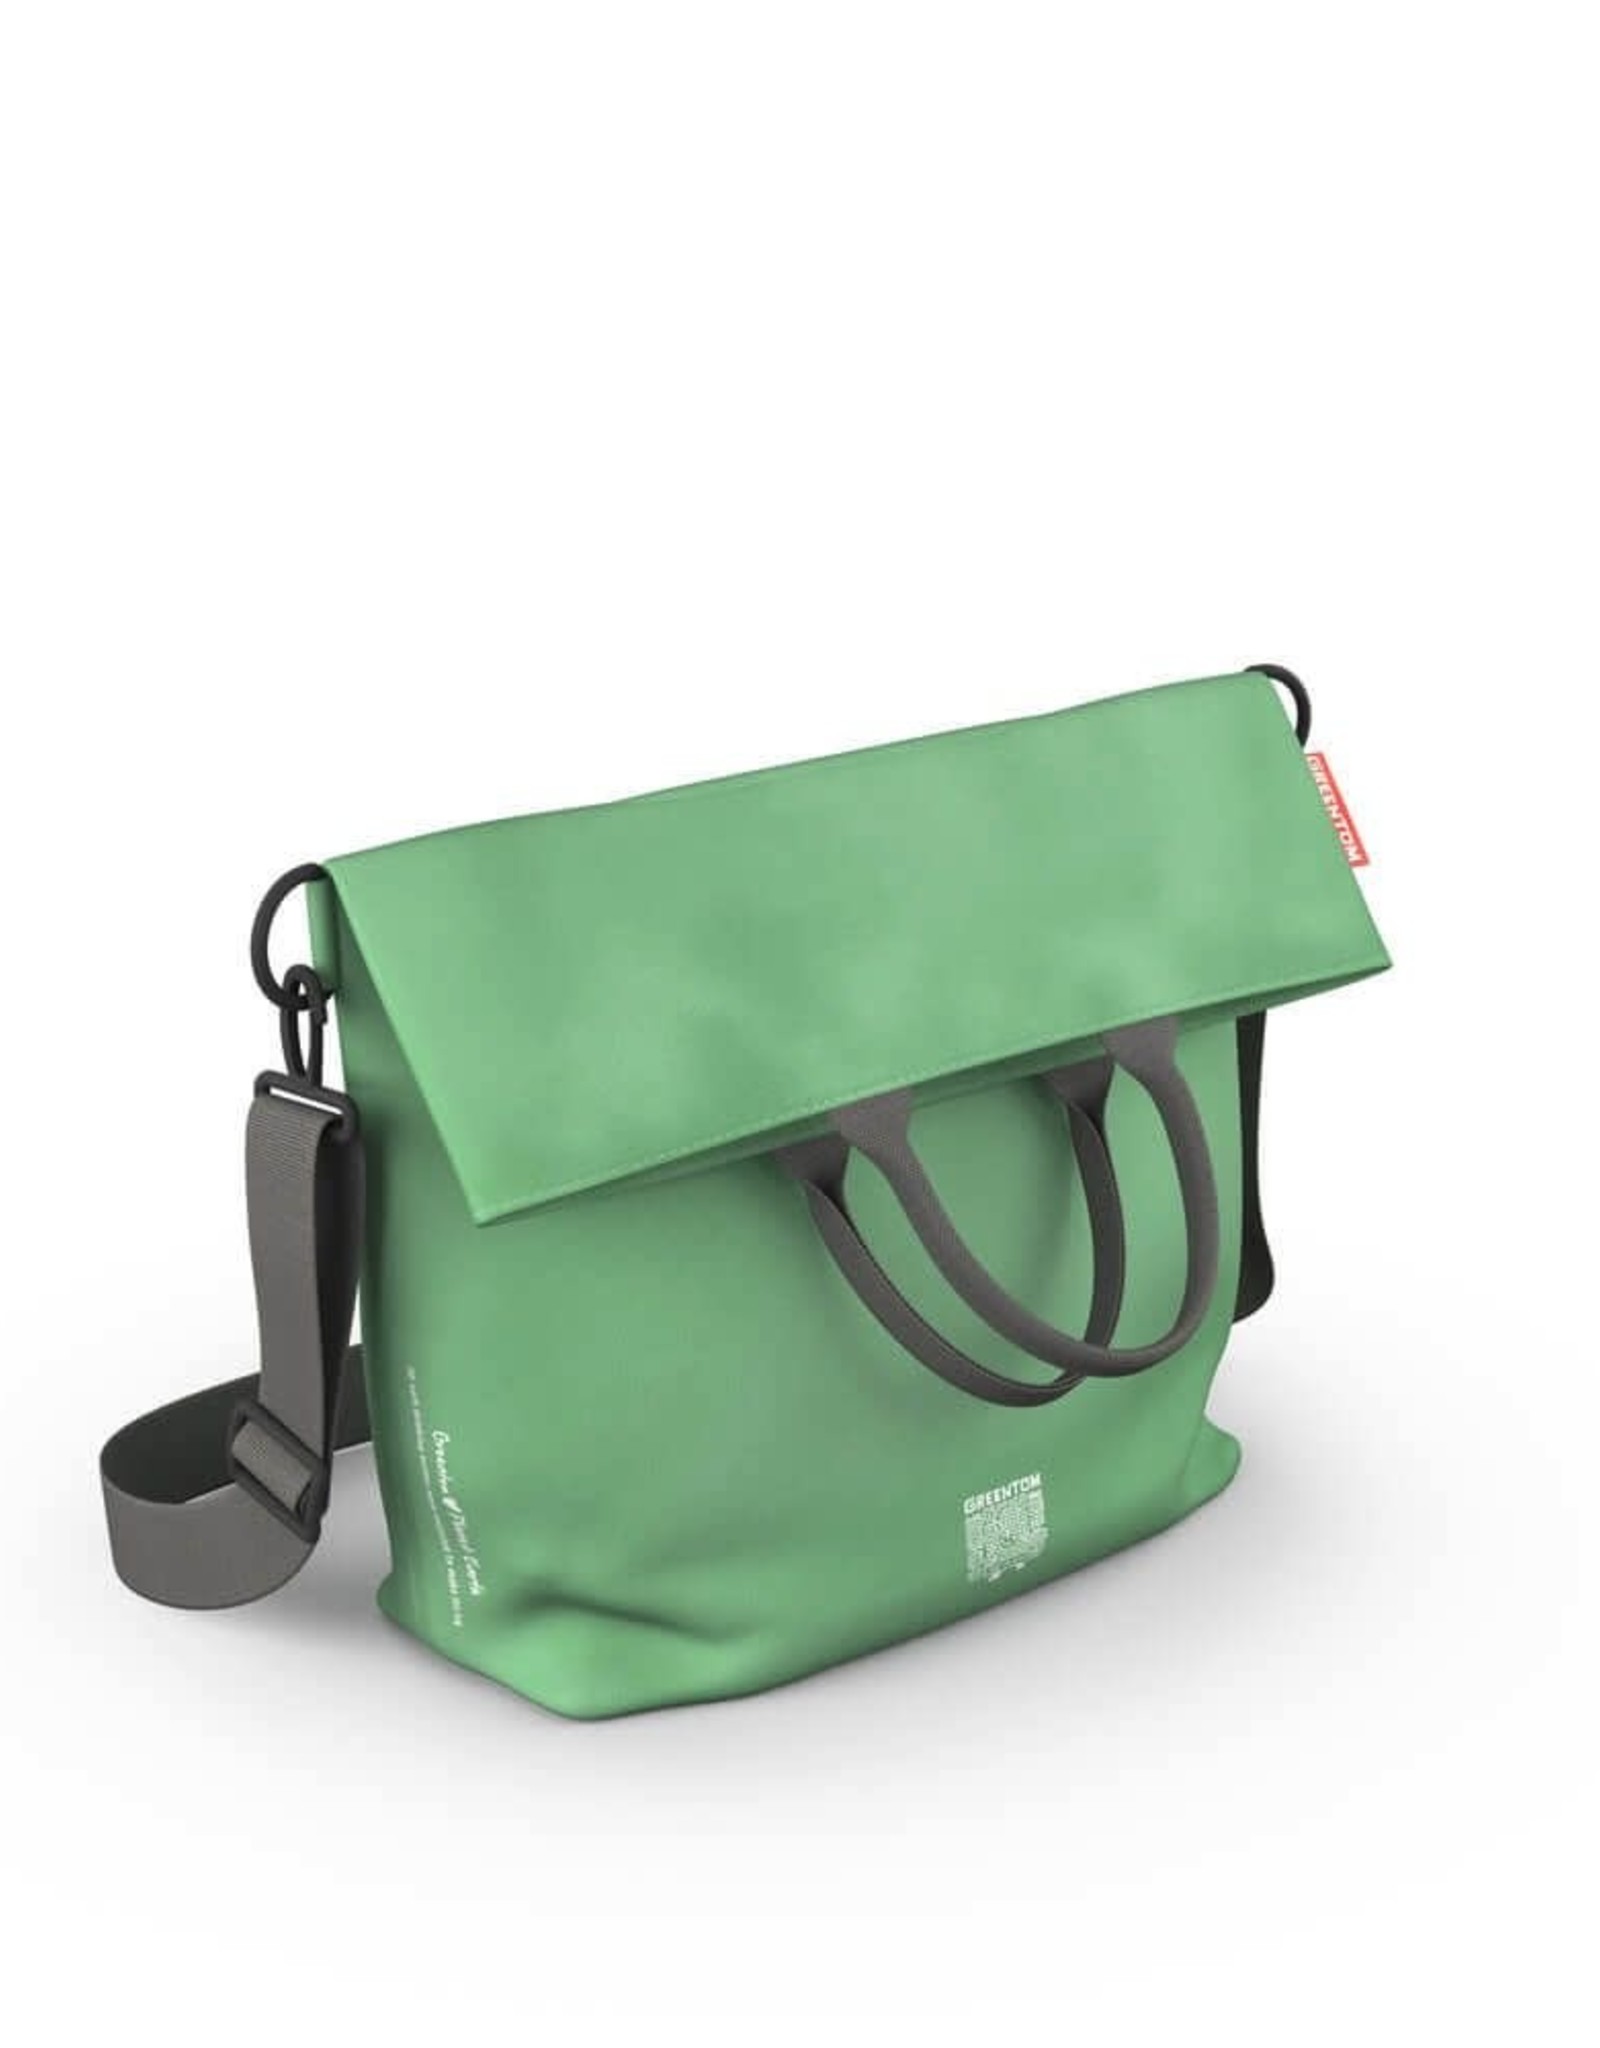 Greentom Diaper Bag Made From Recycled Bottles.